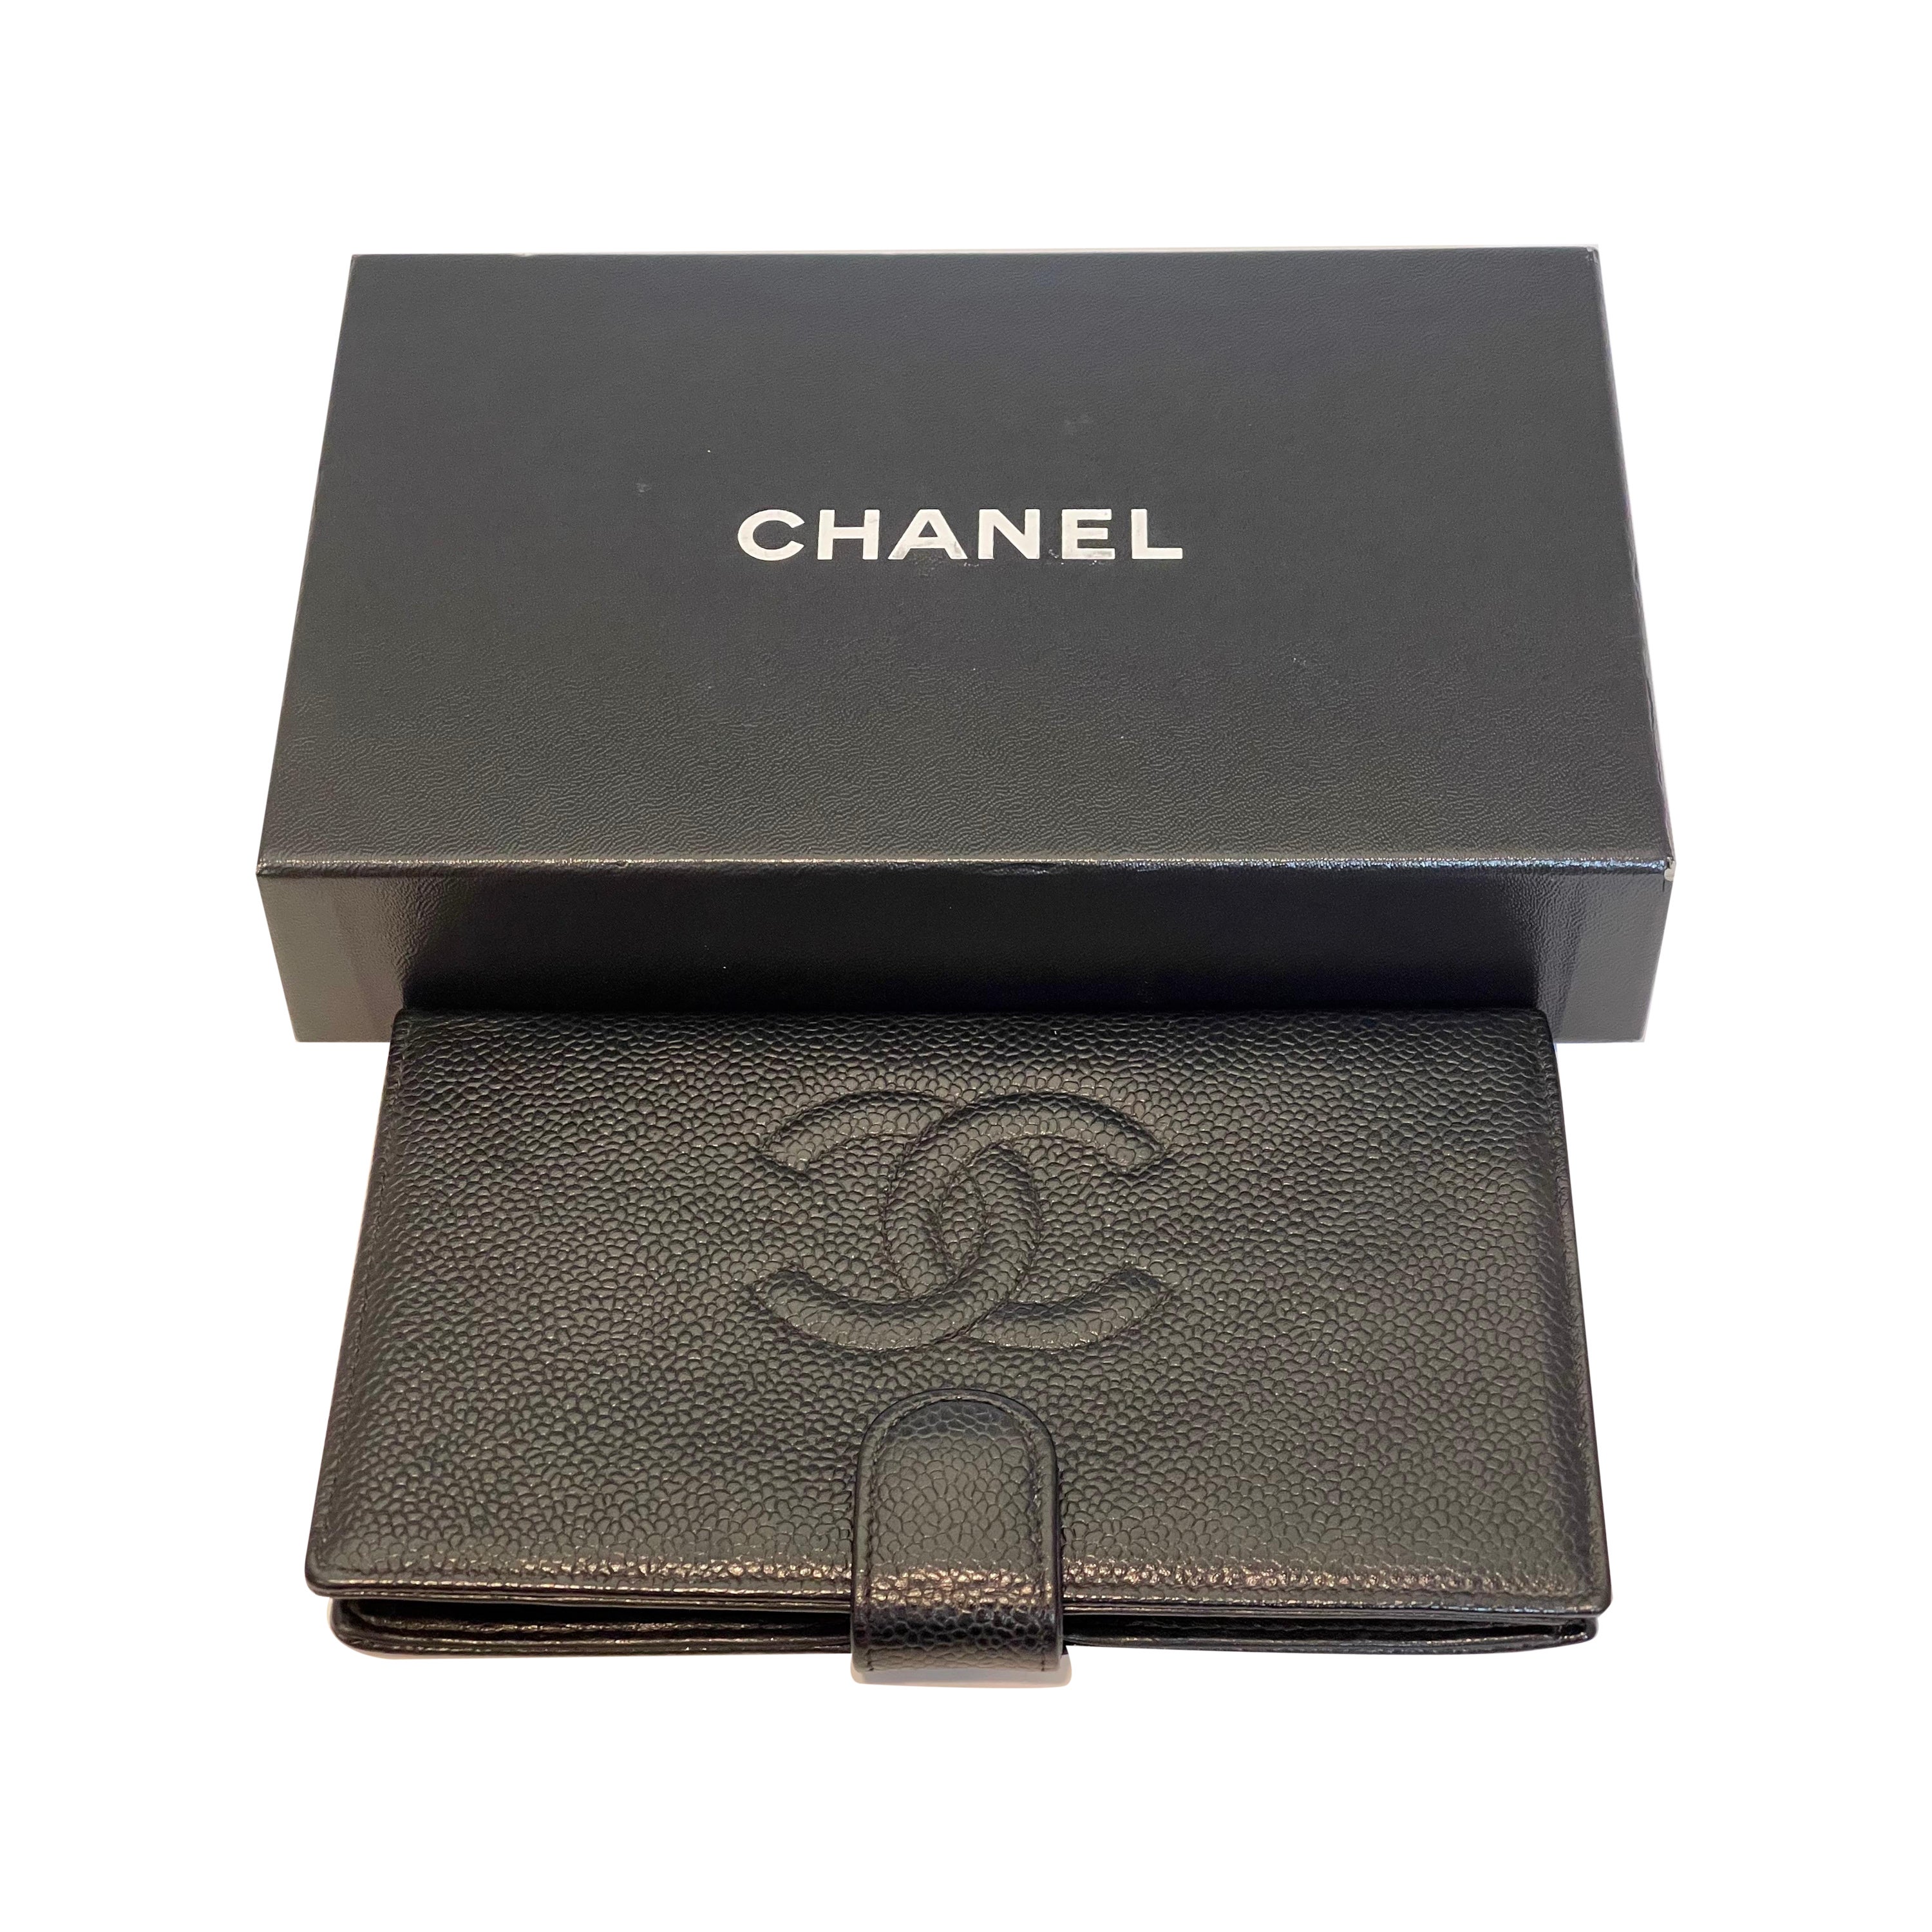 Chanel Black Caviar Leather Cc-w0128p-0003 French Kisslock Wallet with BOX